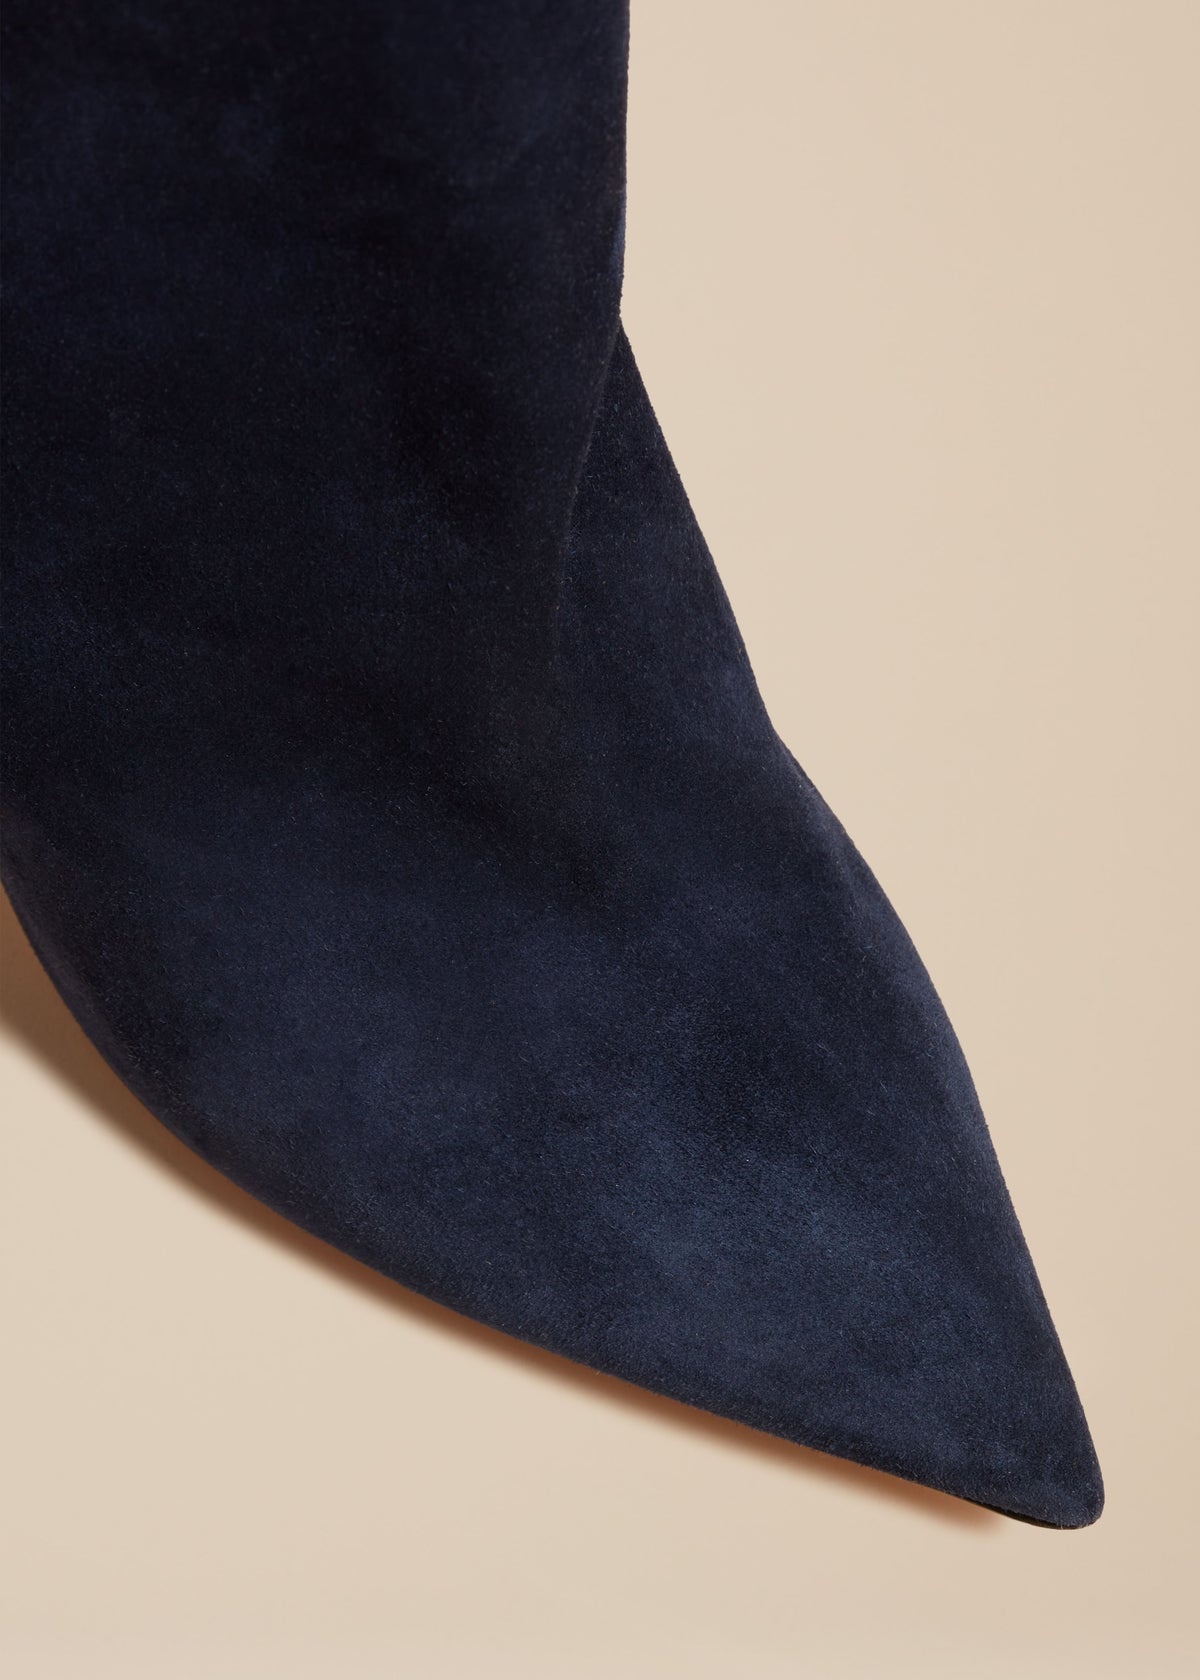 The River Knee-High Boot in Midnight Suede - 4